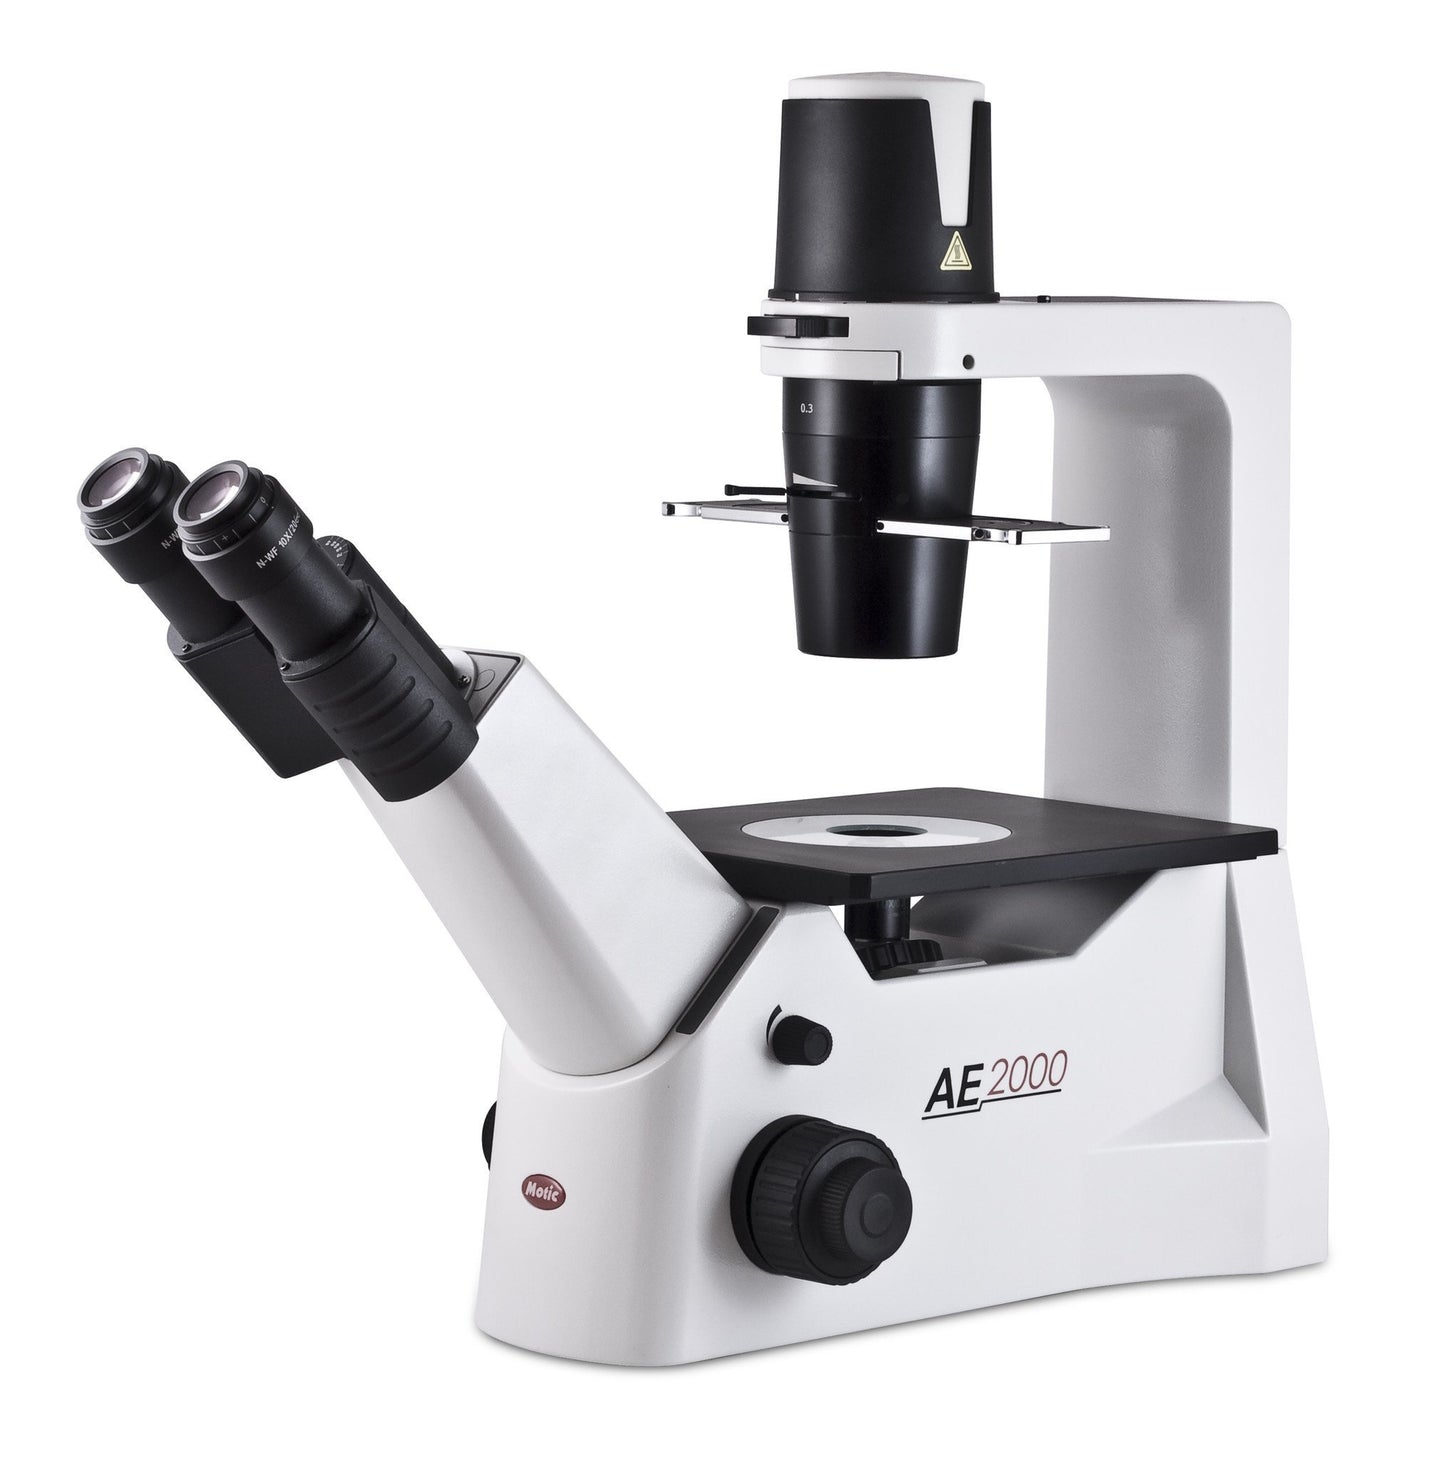 Motic AE2000 Inverted Microscope Series - Microscope Central
 - 1